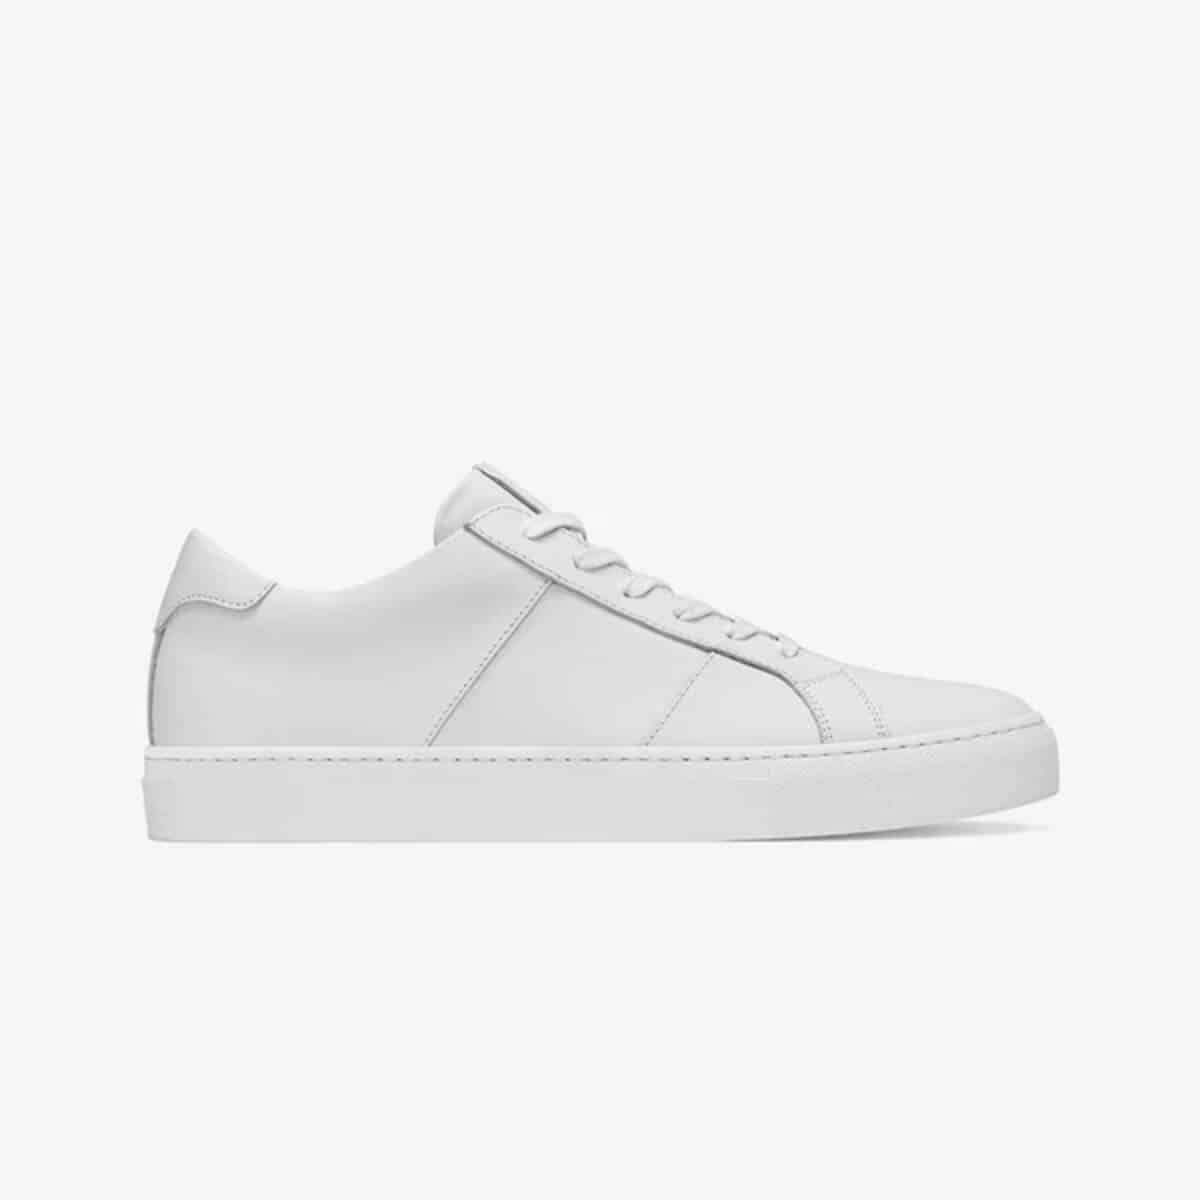 Greats The Royale white sneaker.